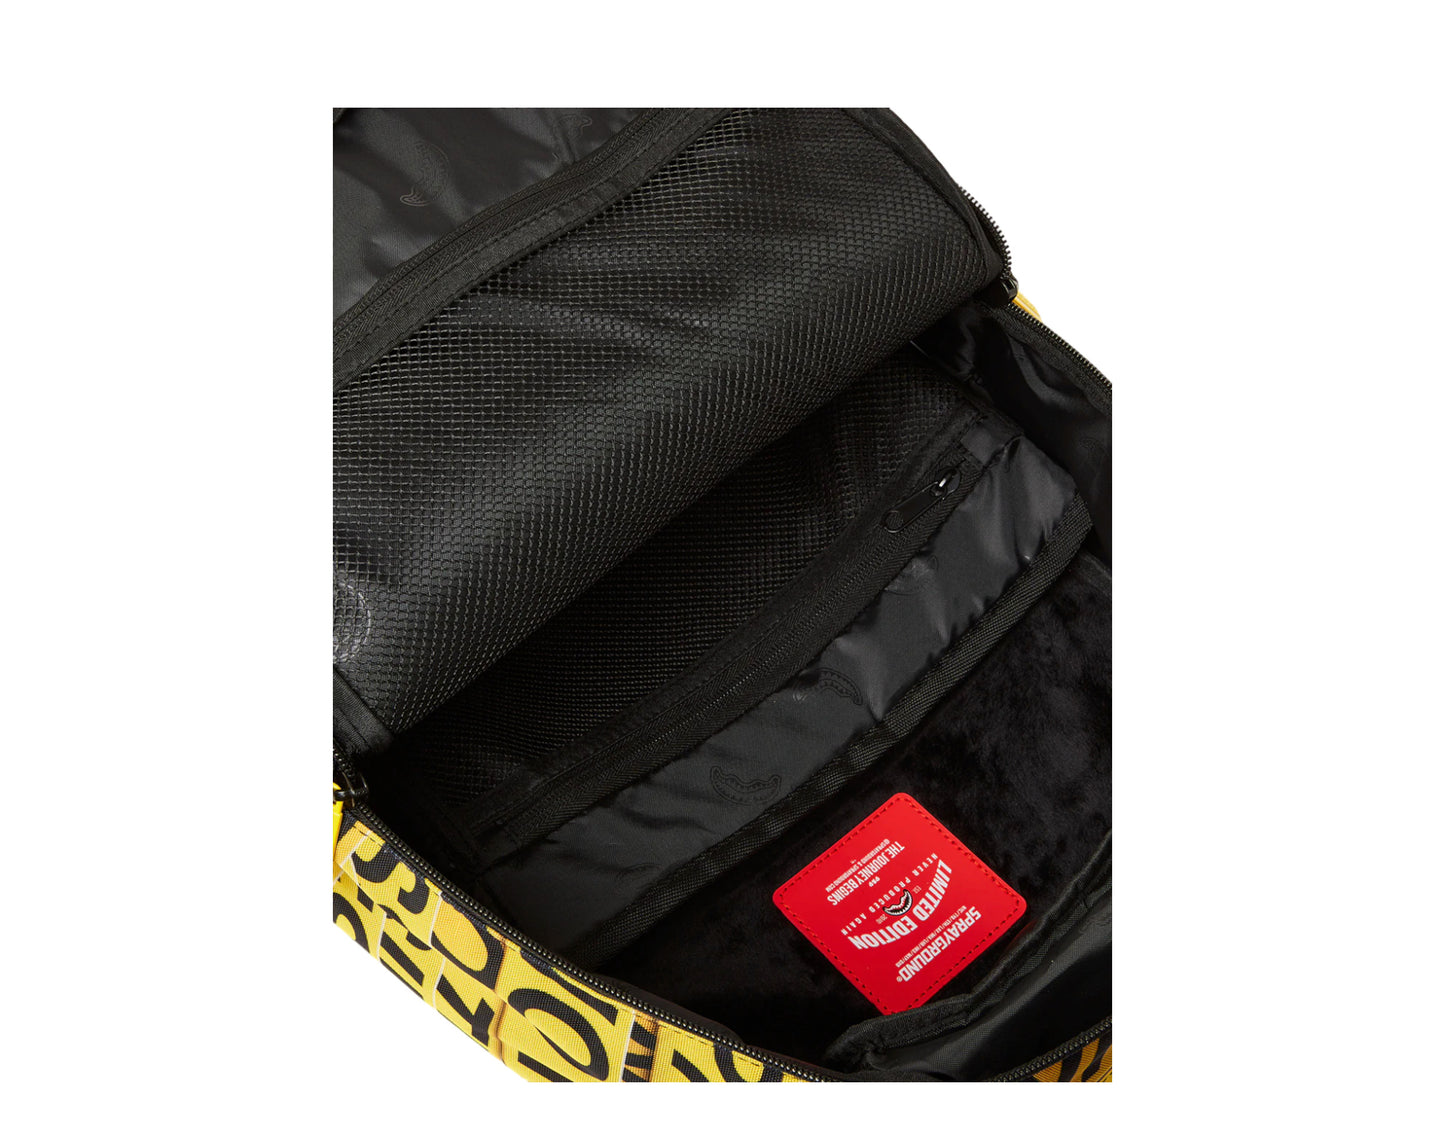 NEW* SPRAYGROUND PLAYER ONE SELECT BACKPACK